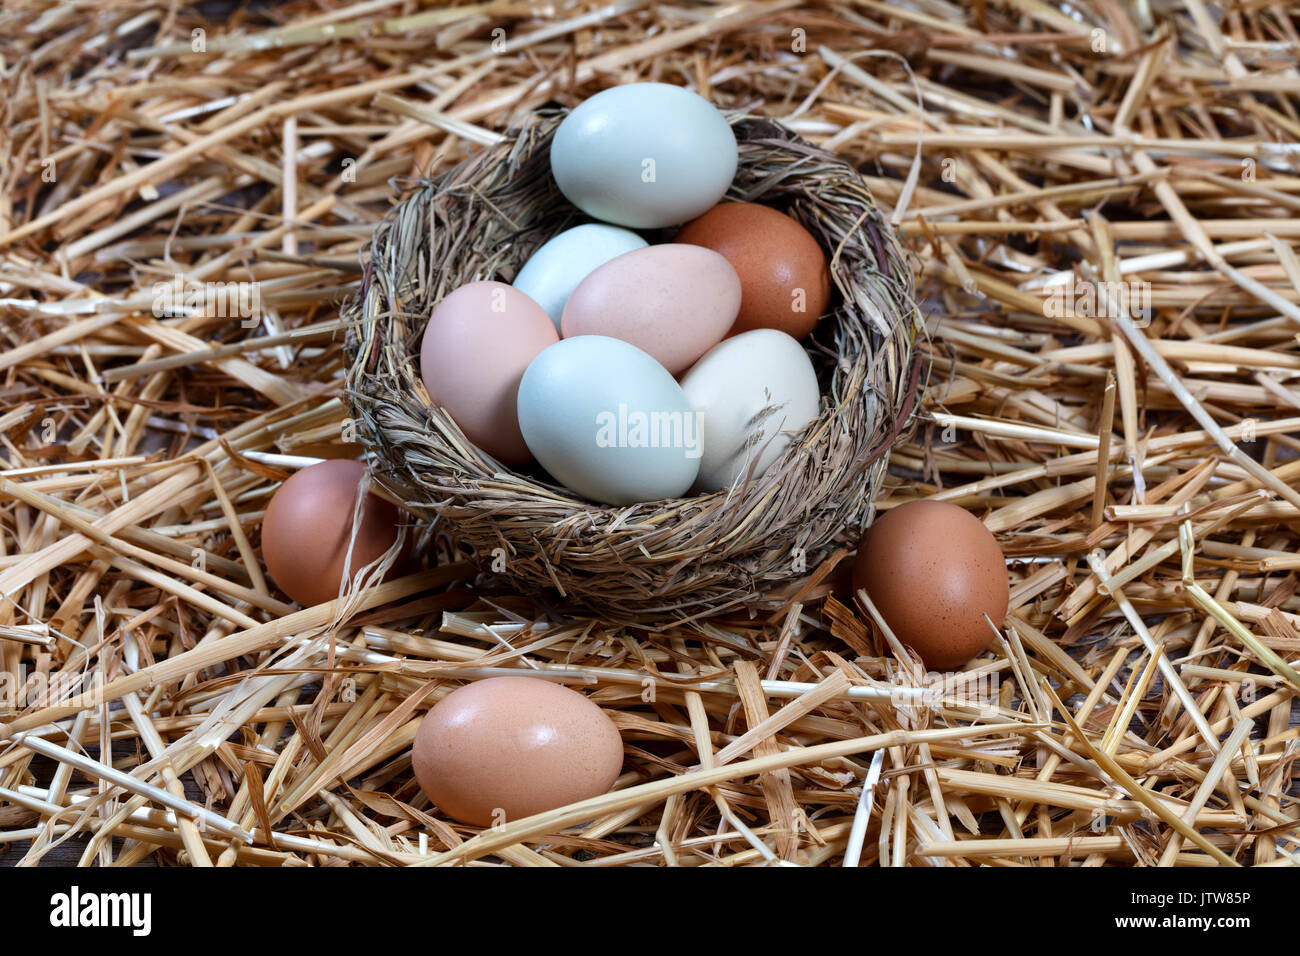 Organic raw eggs in different natural colors in nest egg on straw. Easter holiday background. Stock Photo